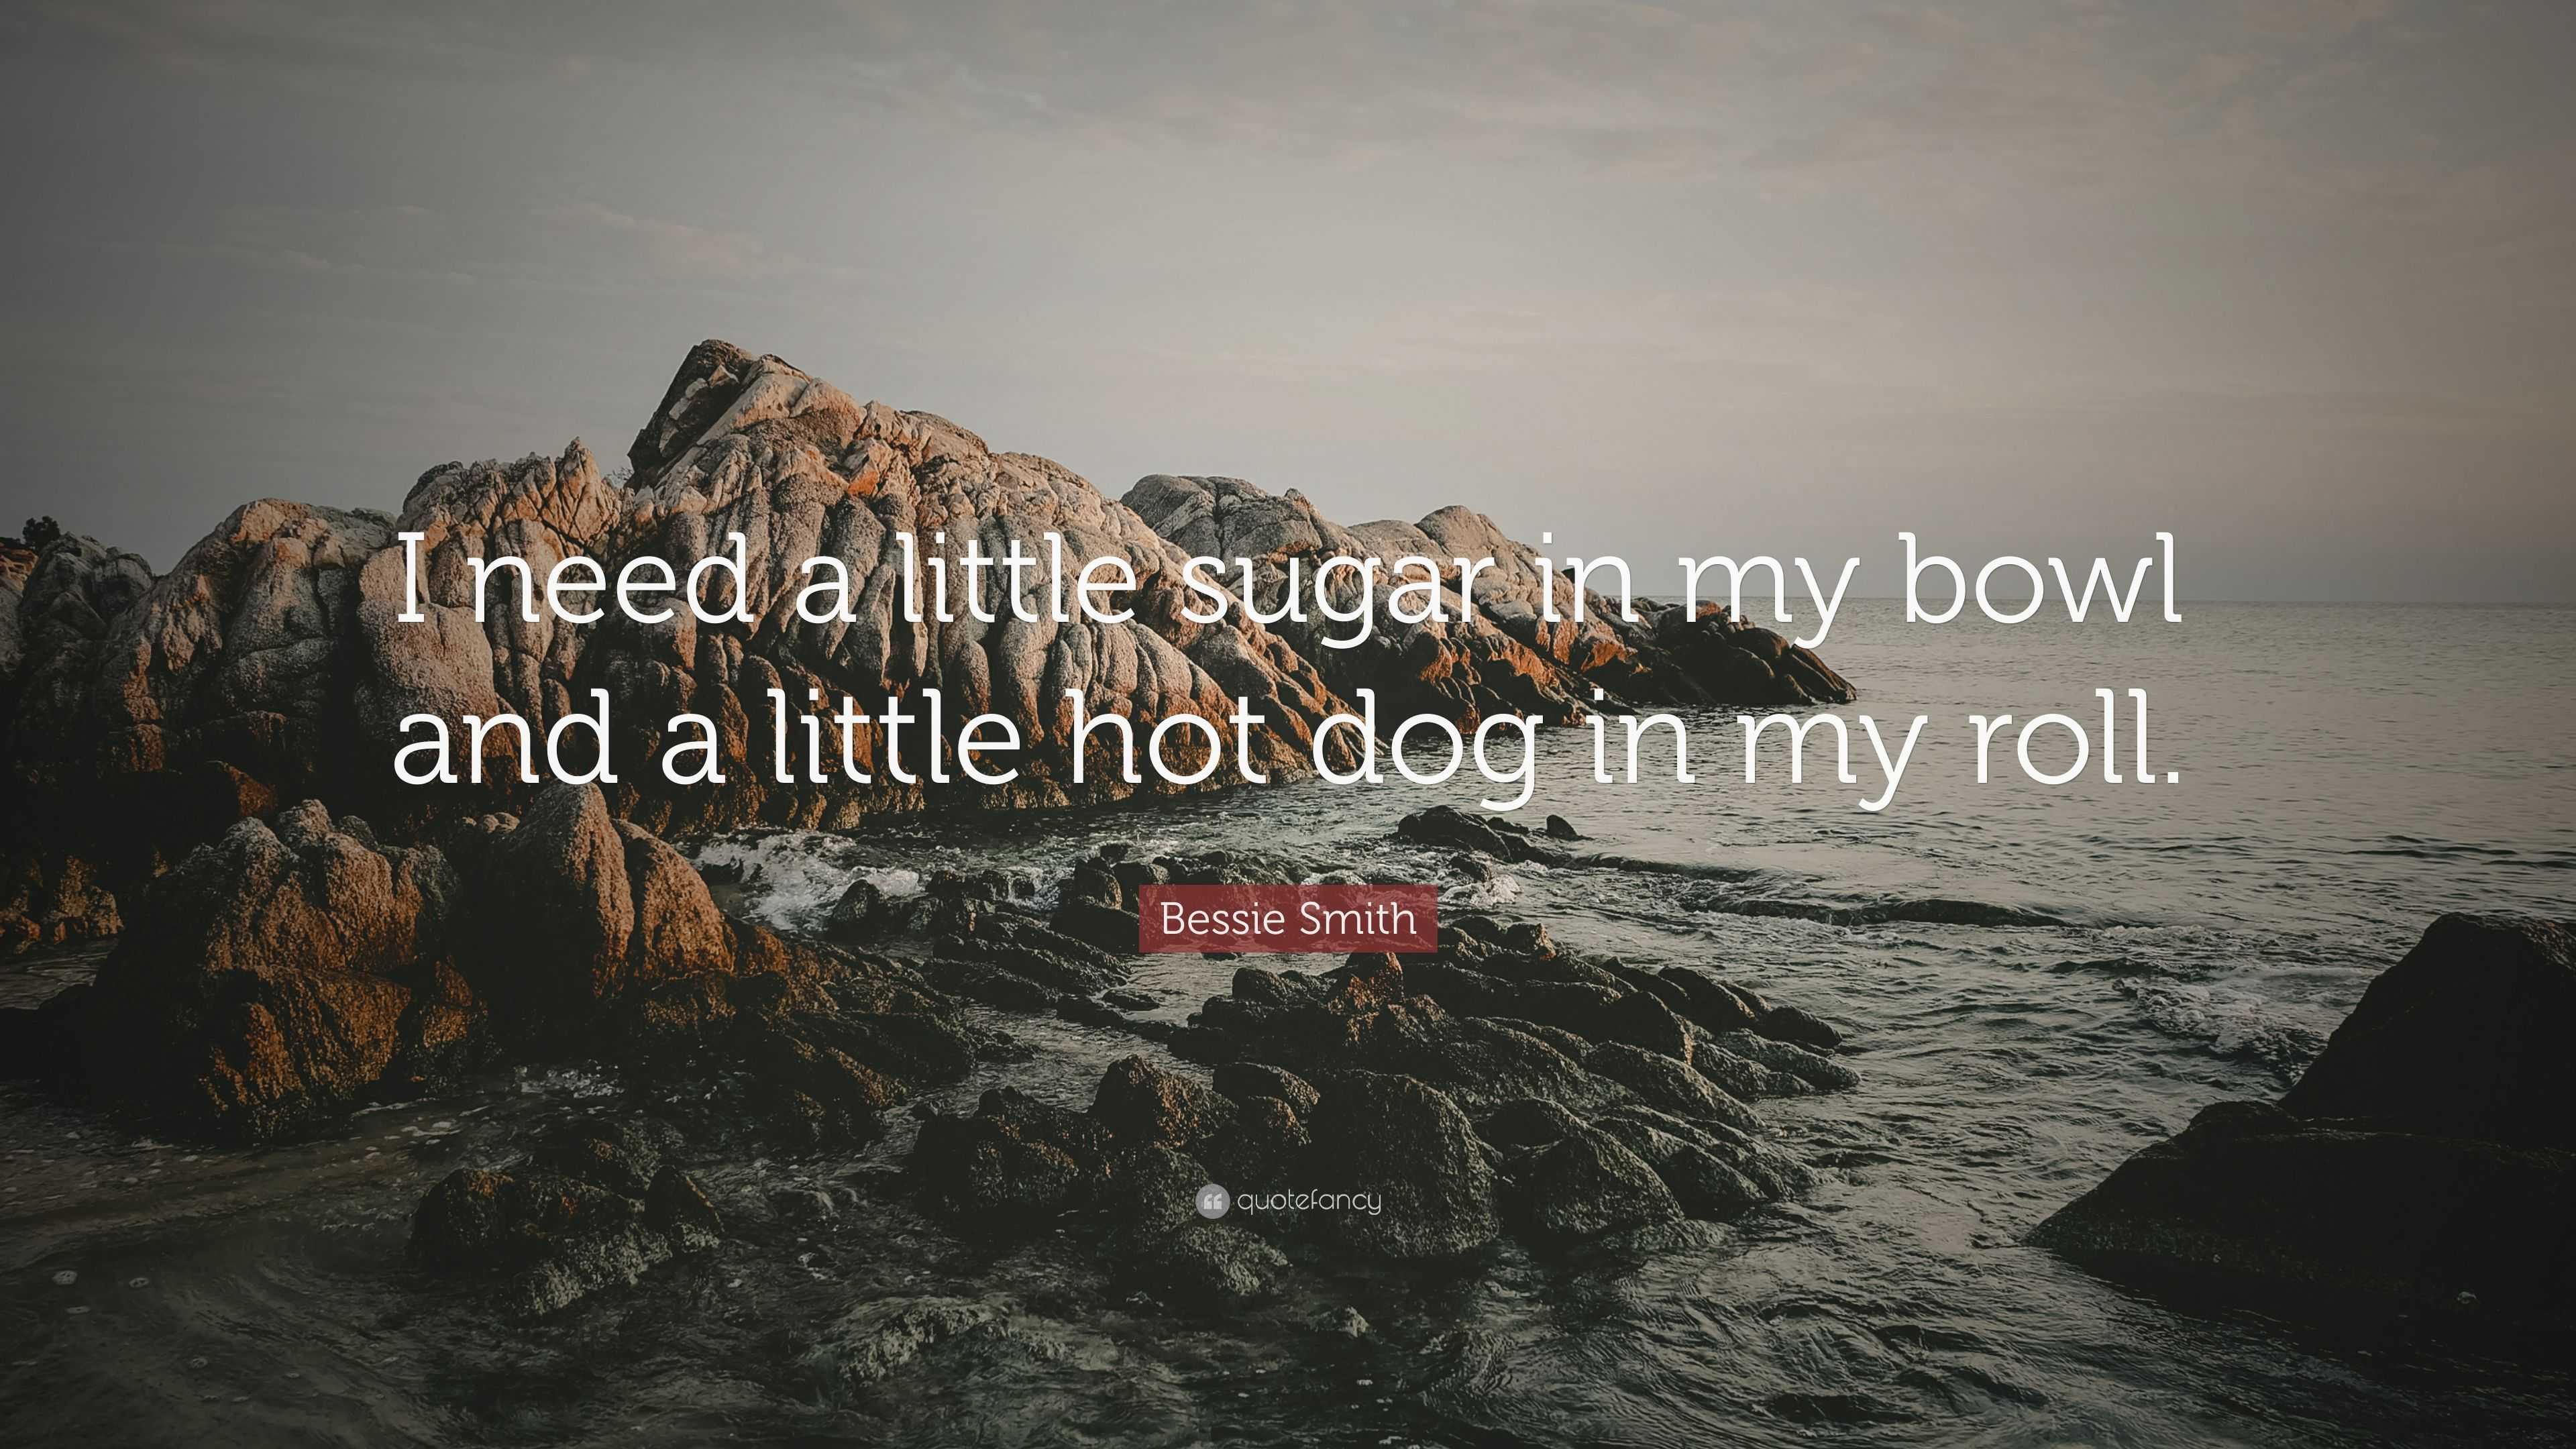 Haiku Sprællemand udmelding Bessie Smith Quote: “I need a little sugar in my bowl and a little hot dog